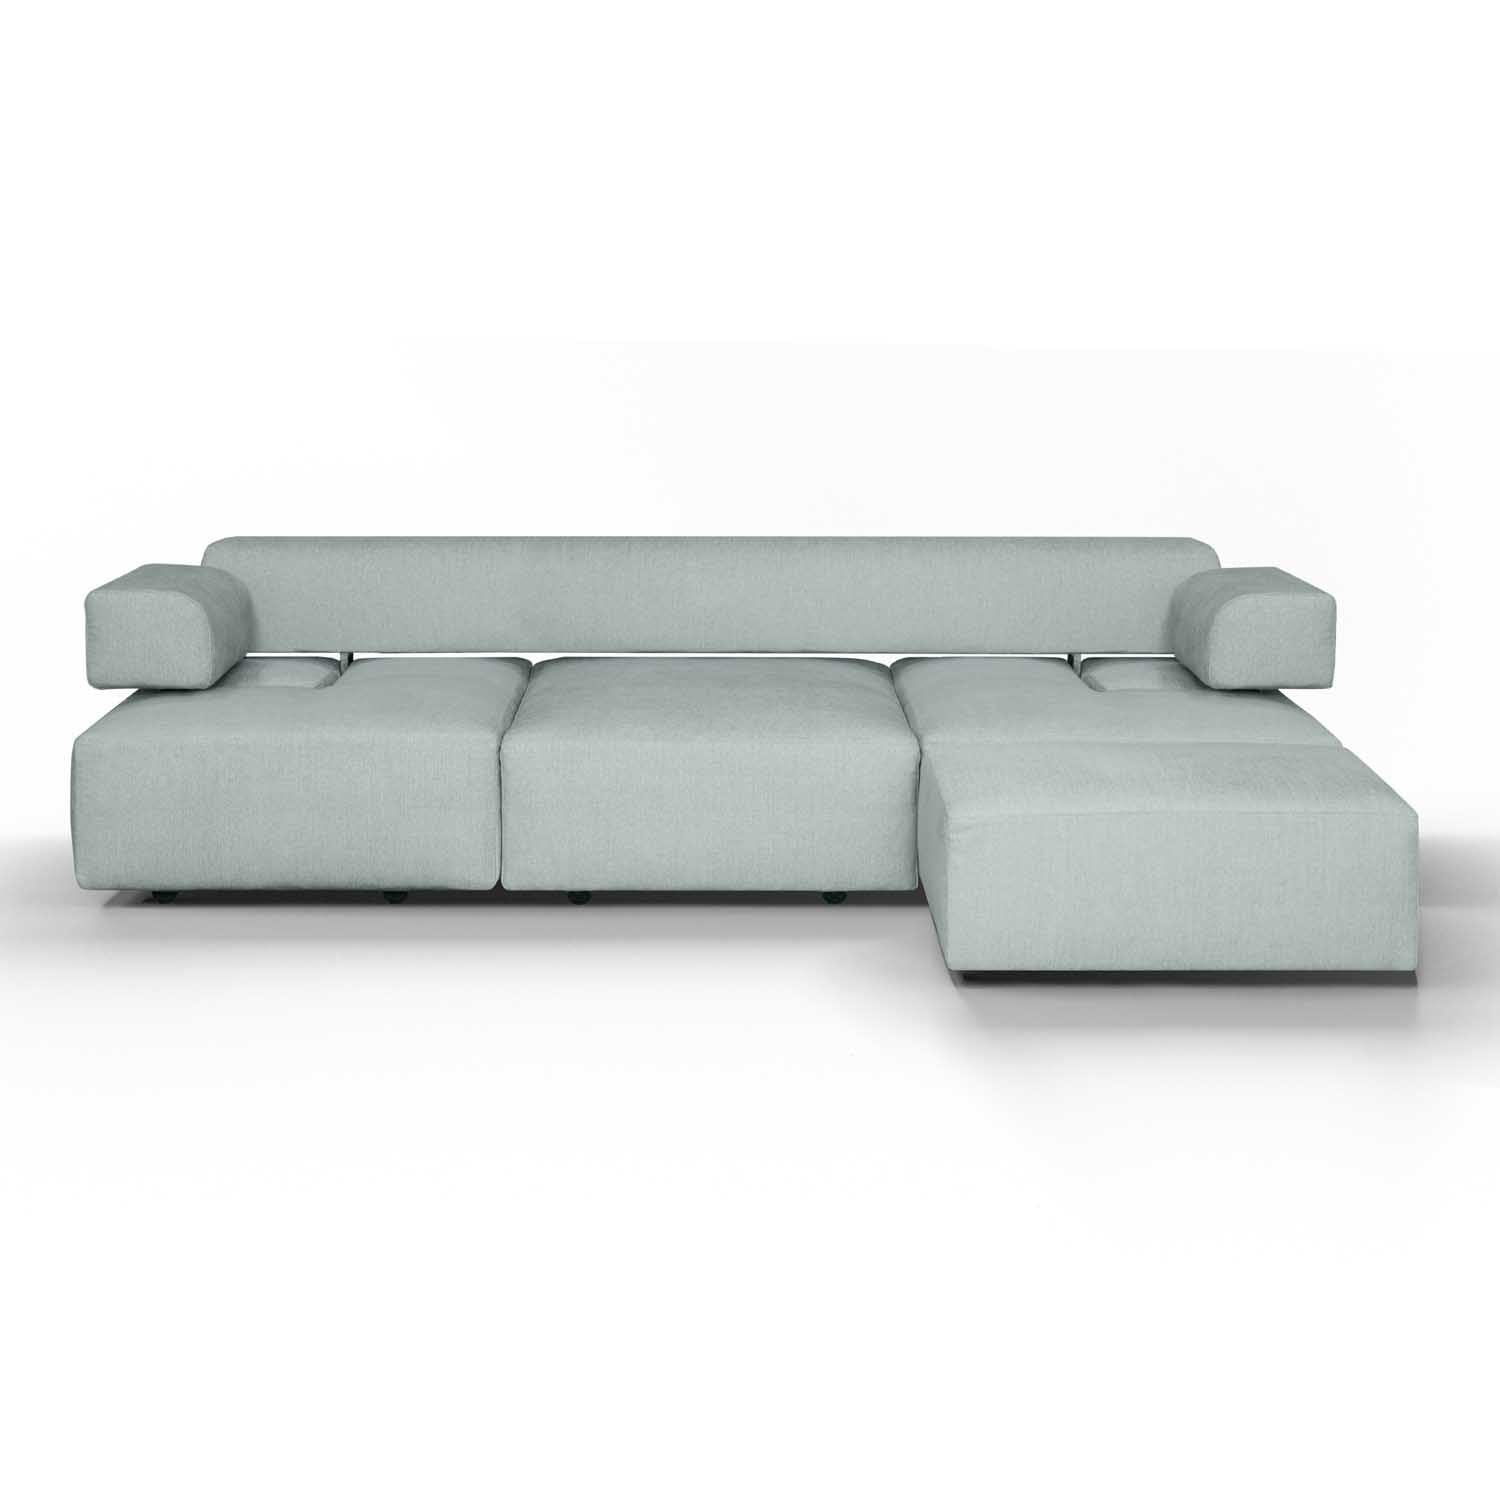 Create your color palette with Domino Modular Sofa.